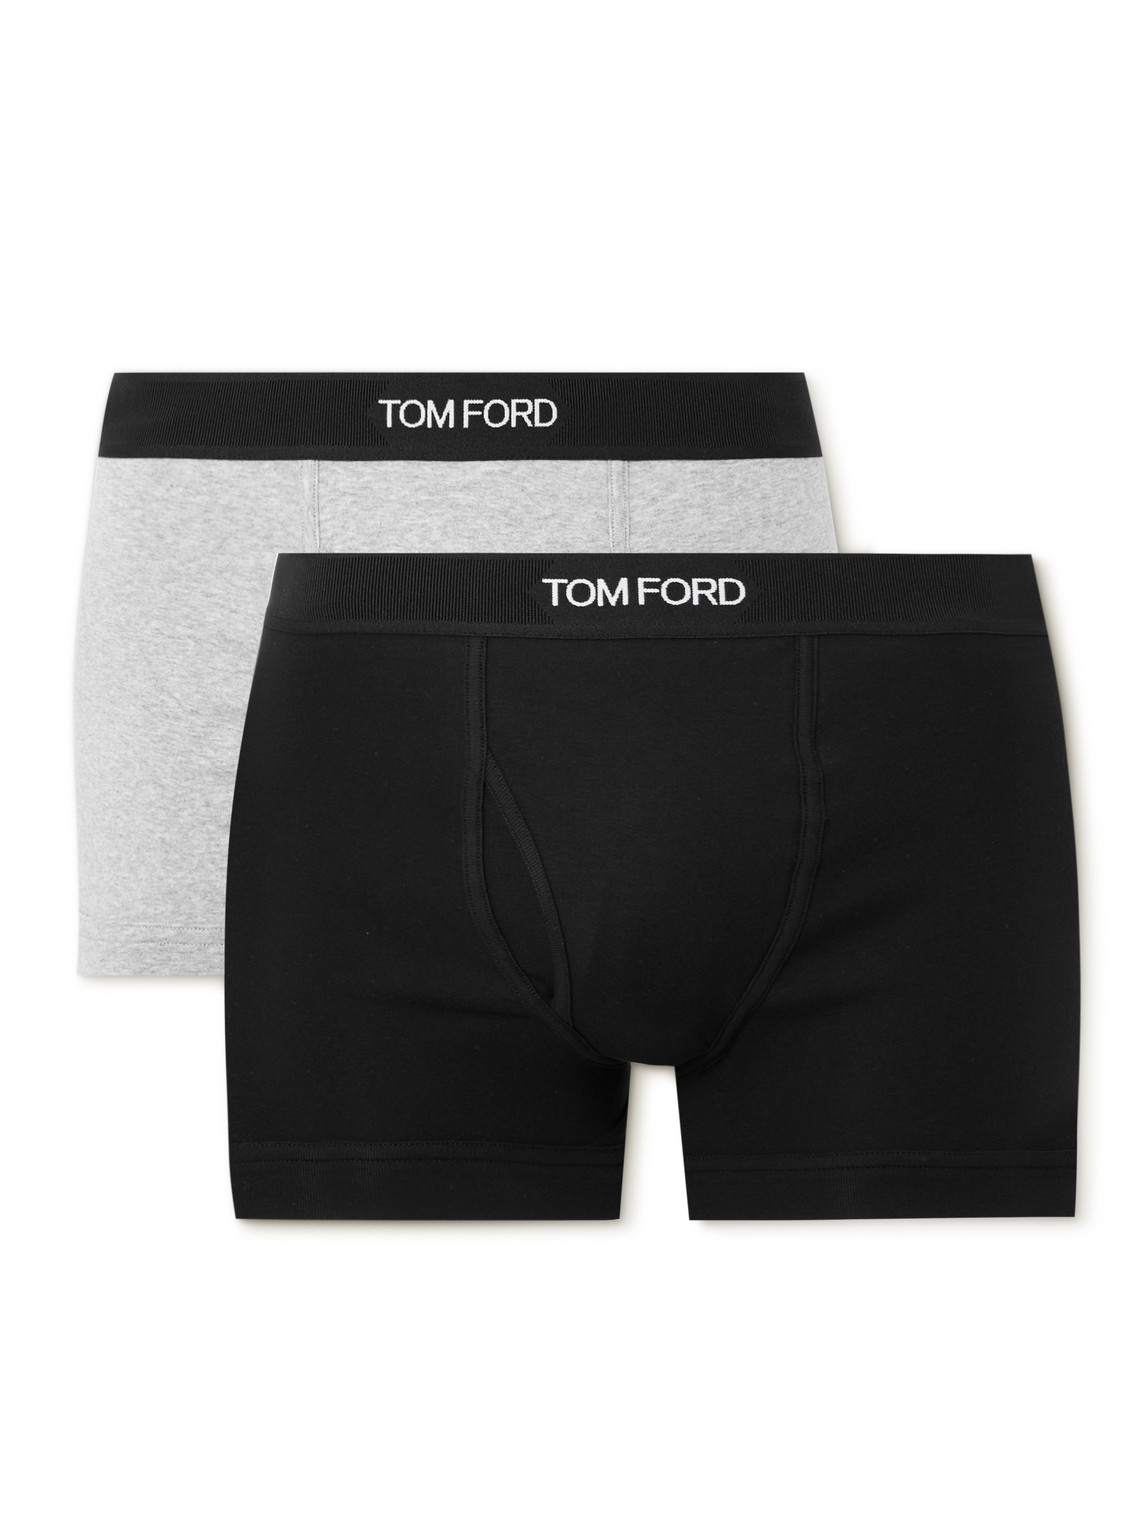 TOM FORD - Two-Pack Stretch-Cotton Jersey Boxer Briefs - Men - Multi - S von TOM FORD